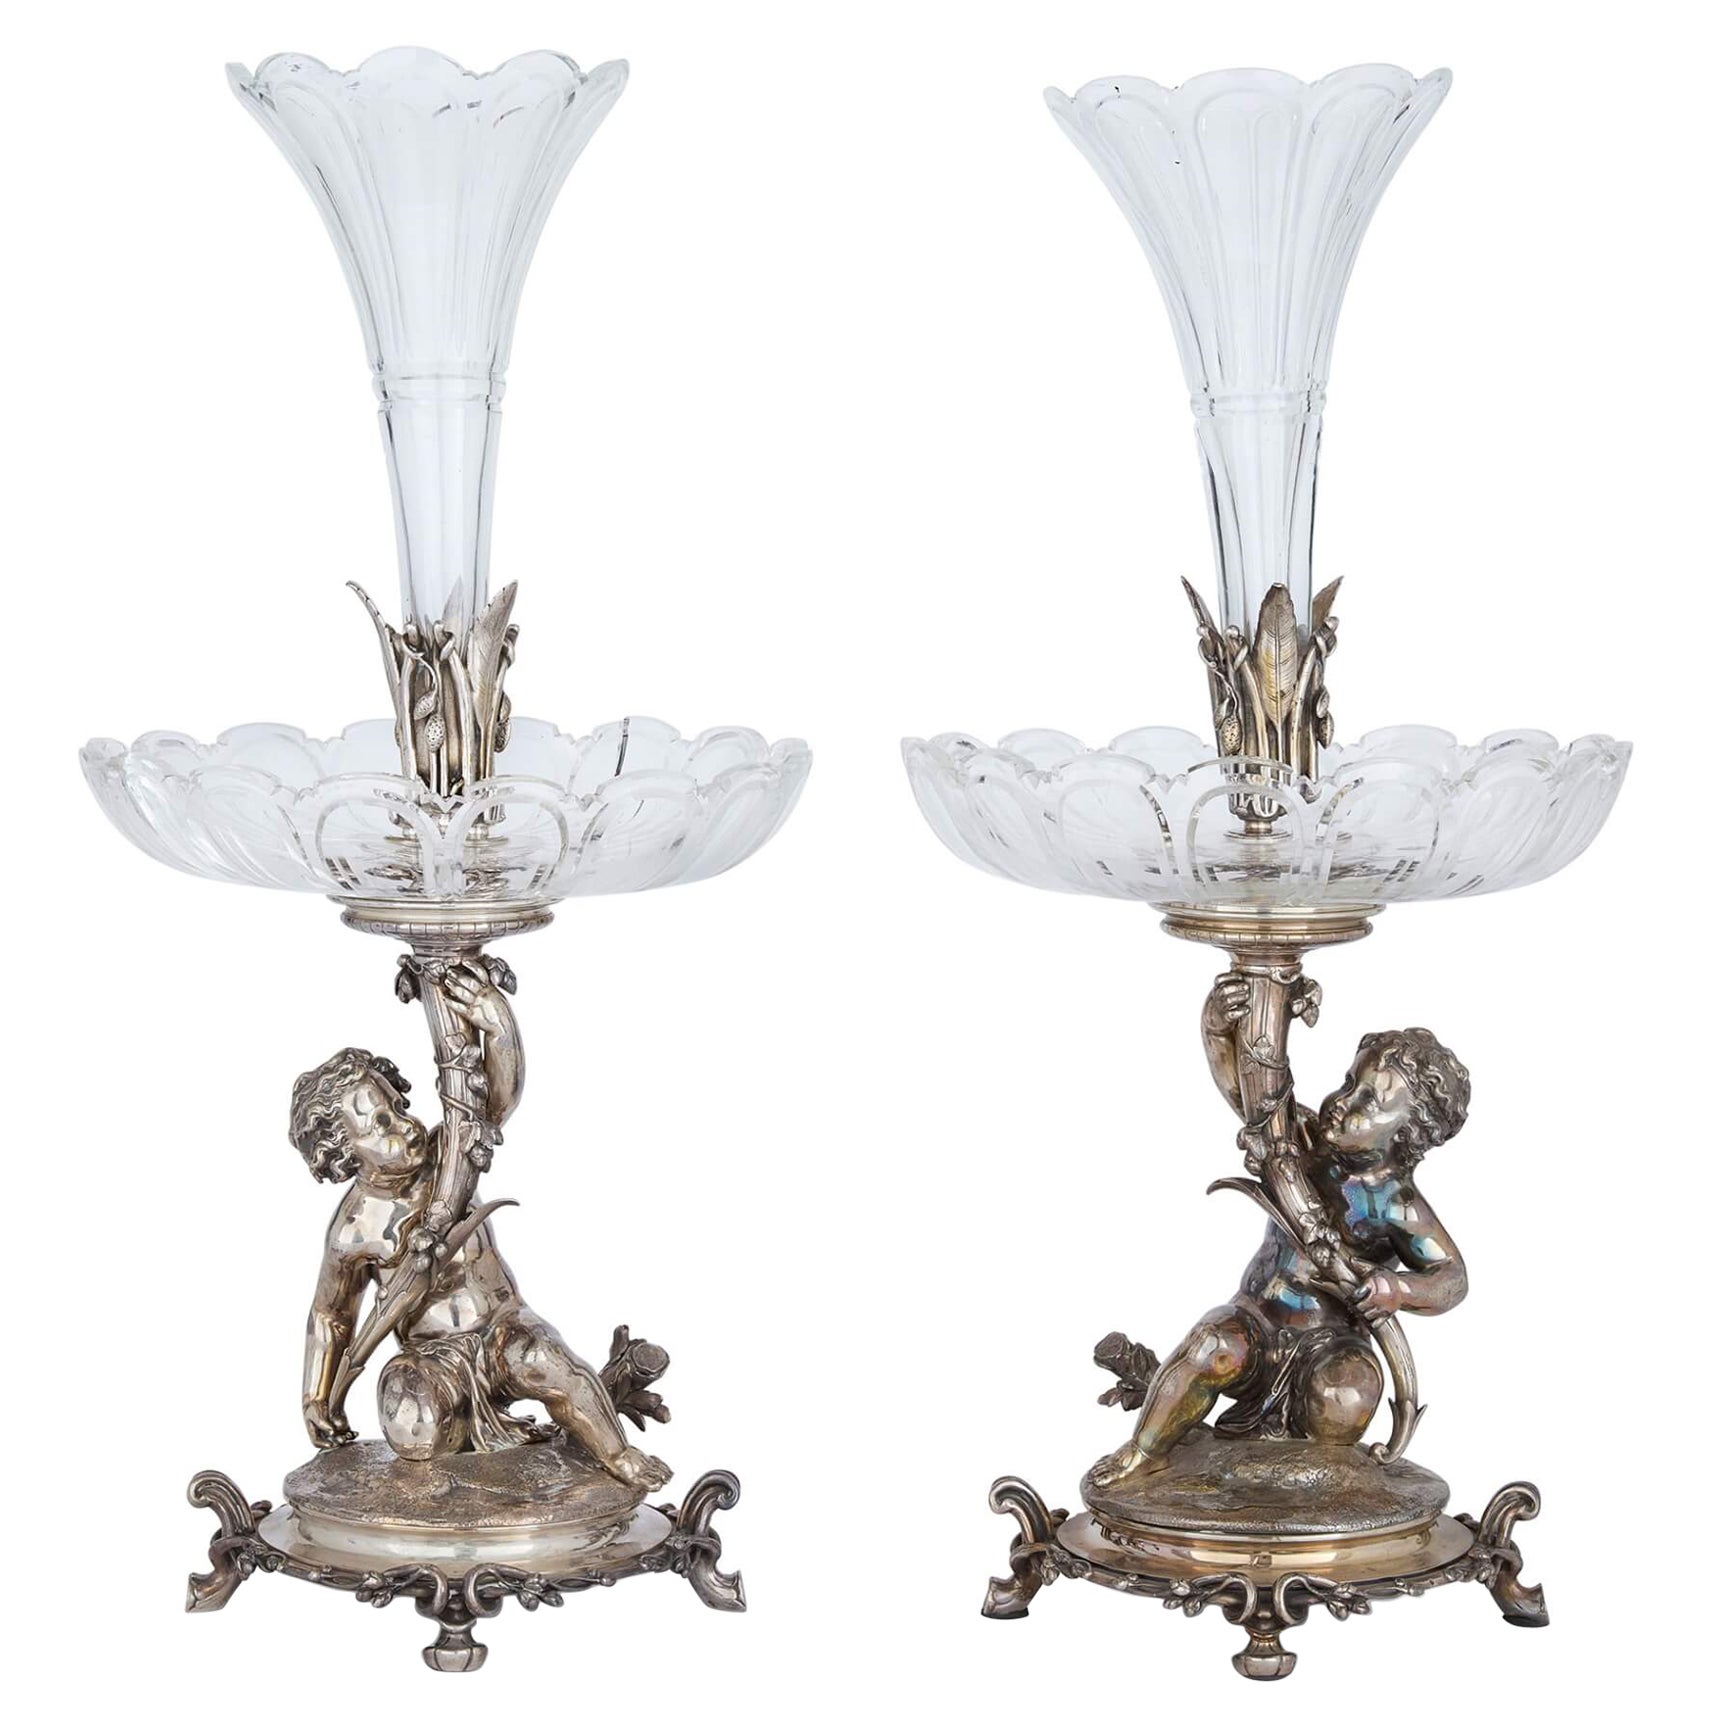 Pair of Christofle Silvered Bronze and Cut-Glass Epergnes